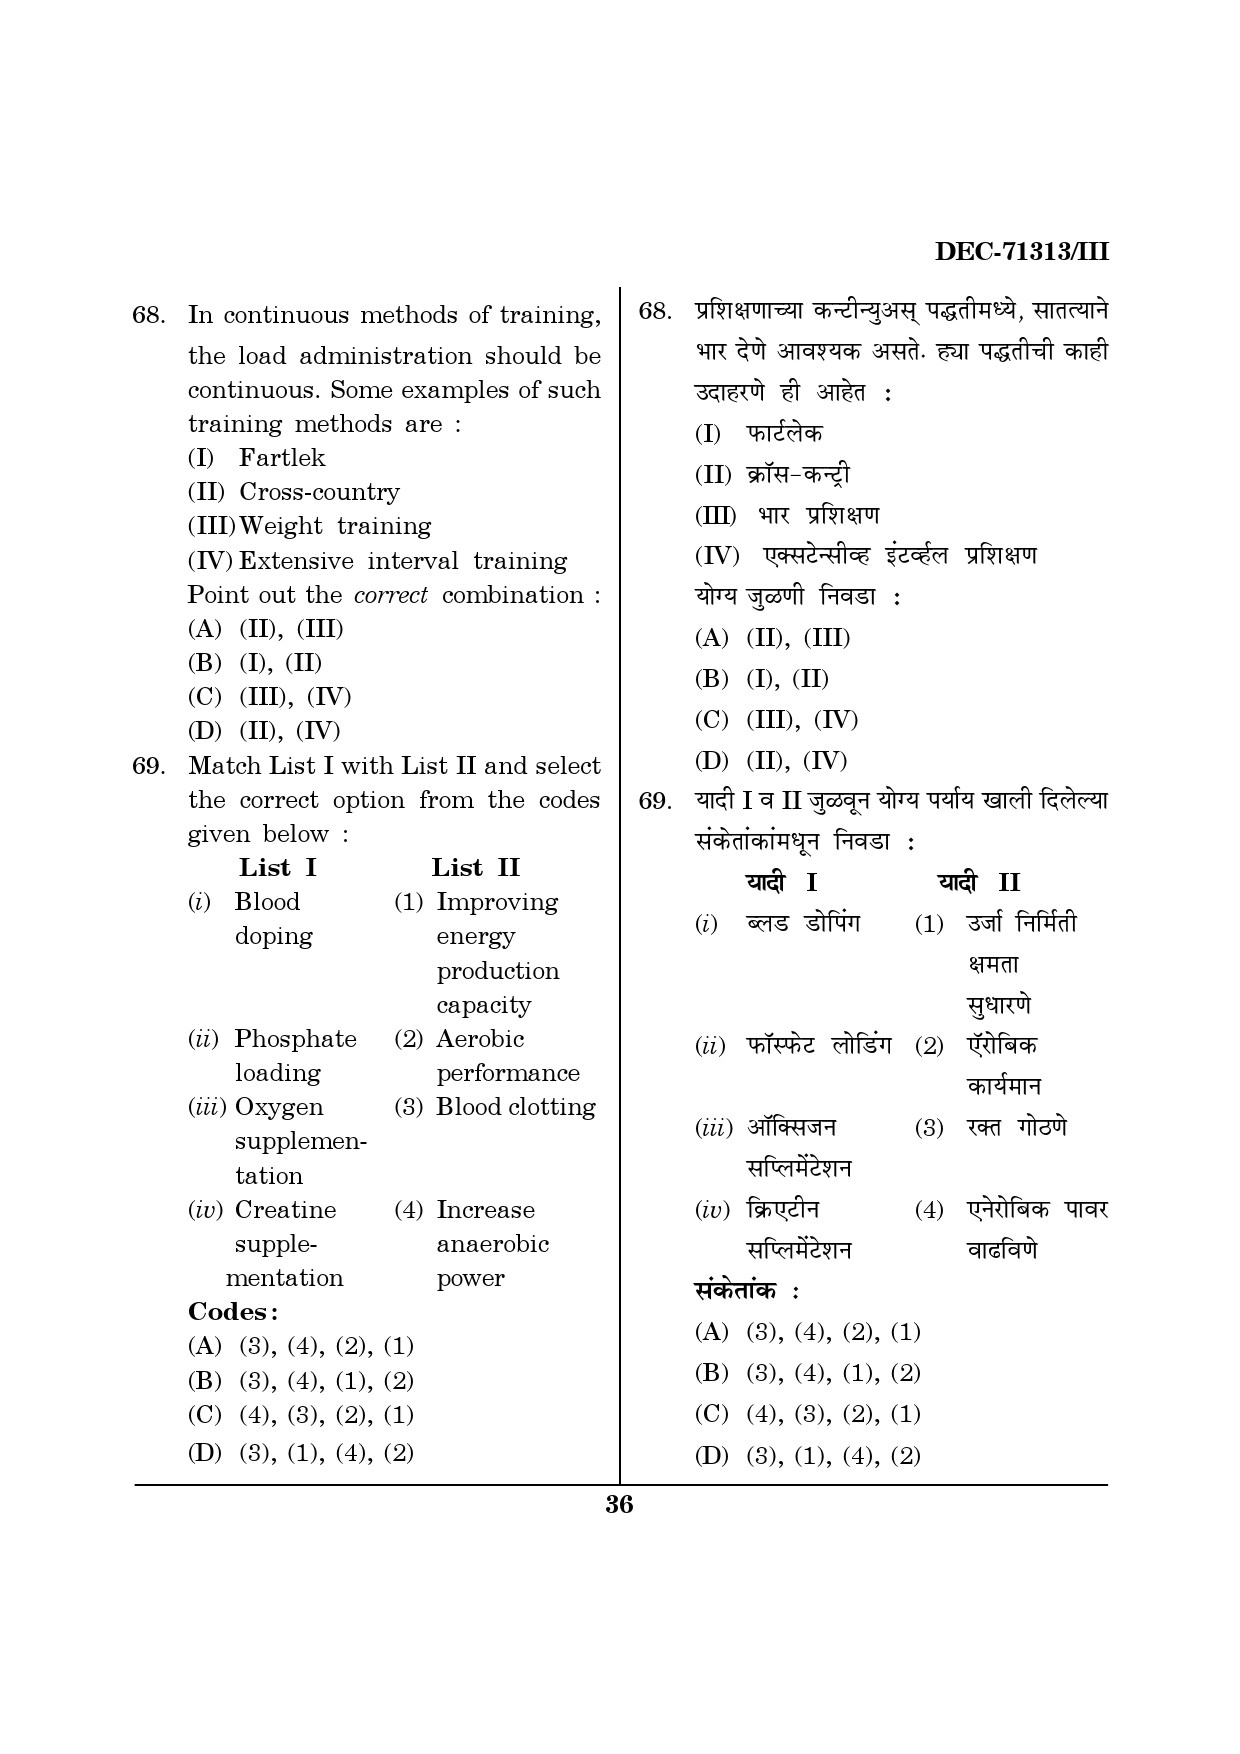 Maharashtra SET Physical Education Question Paper III December 2013 35